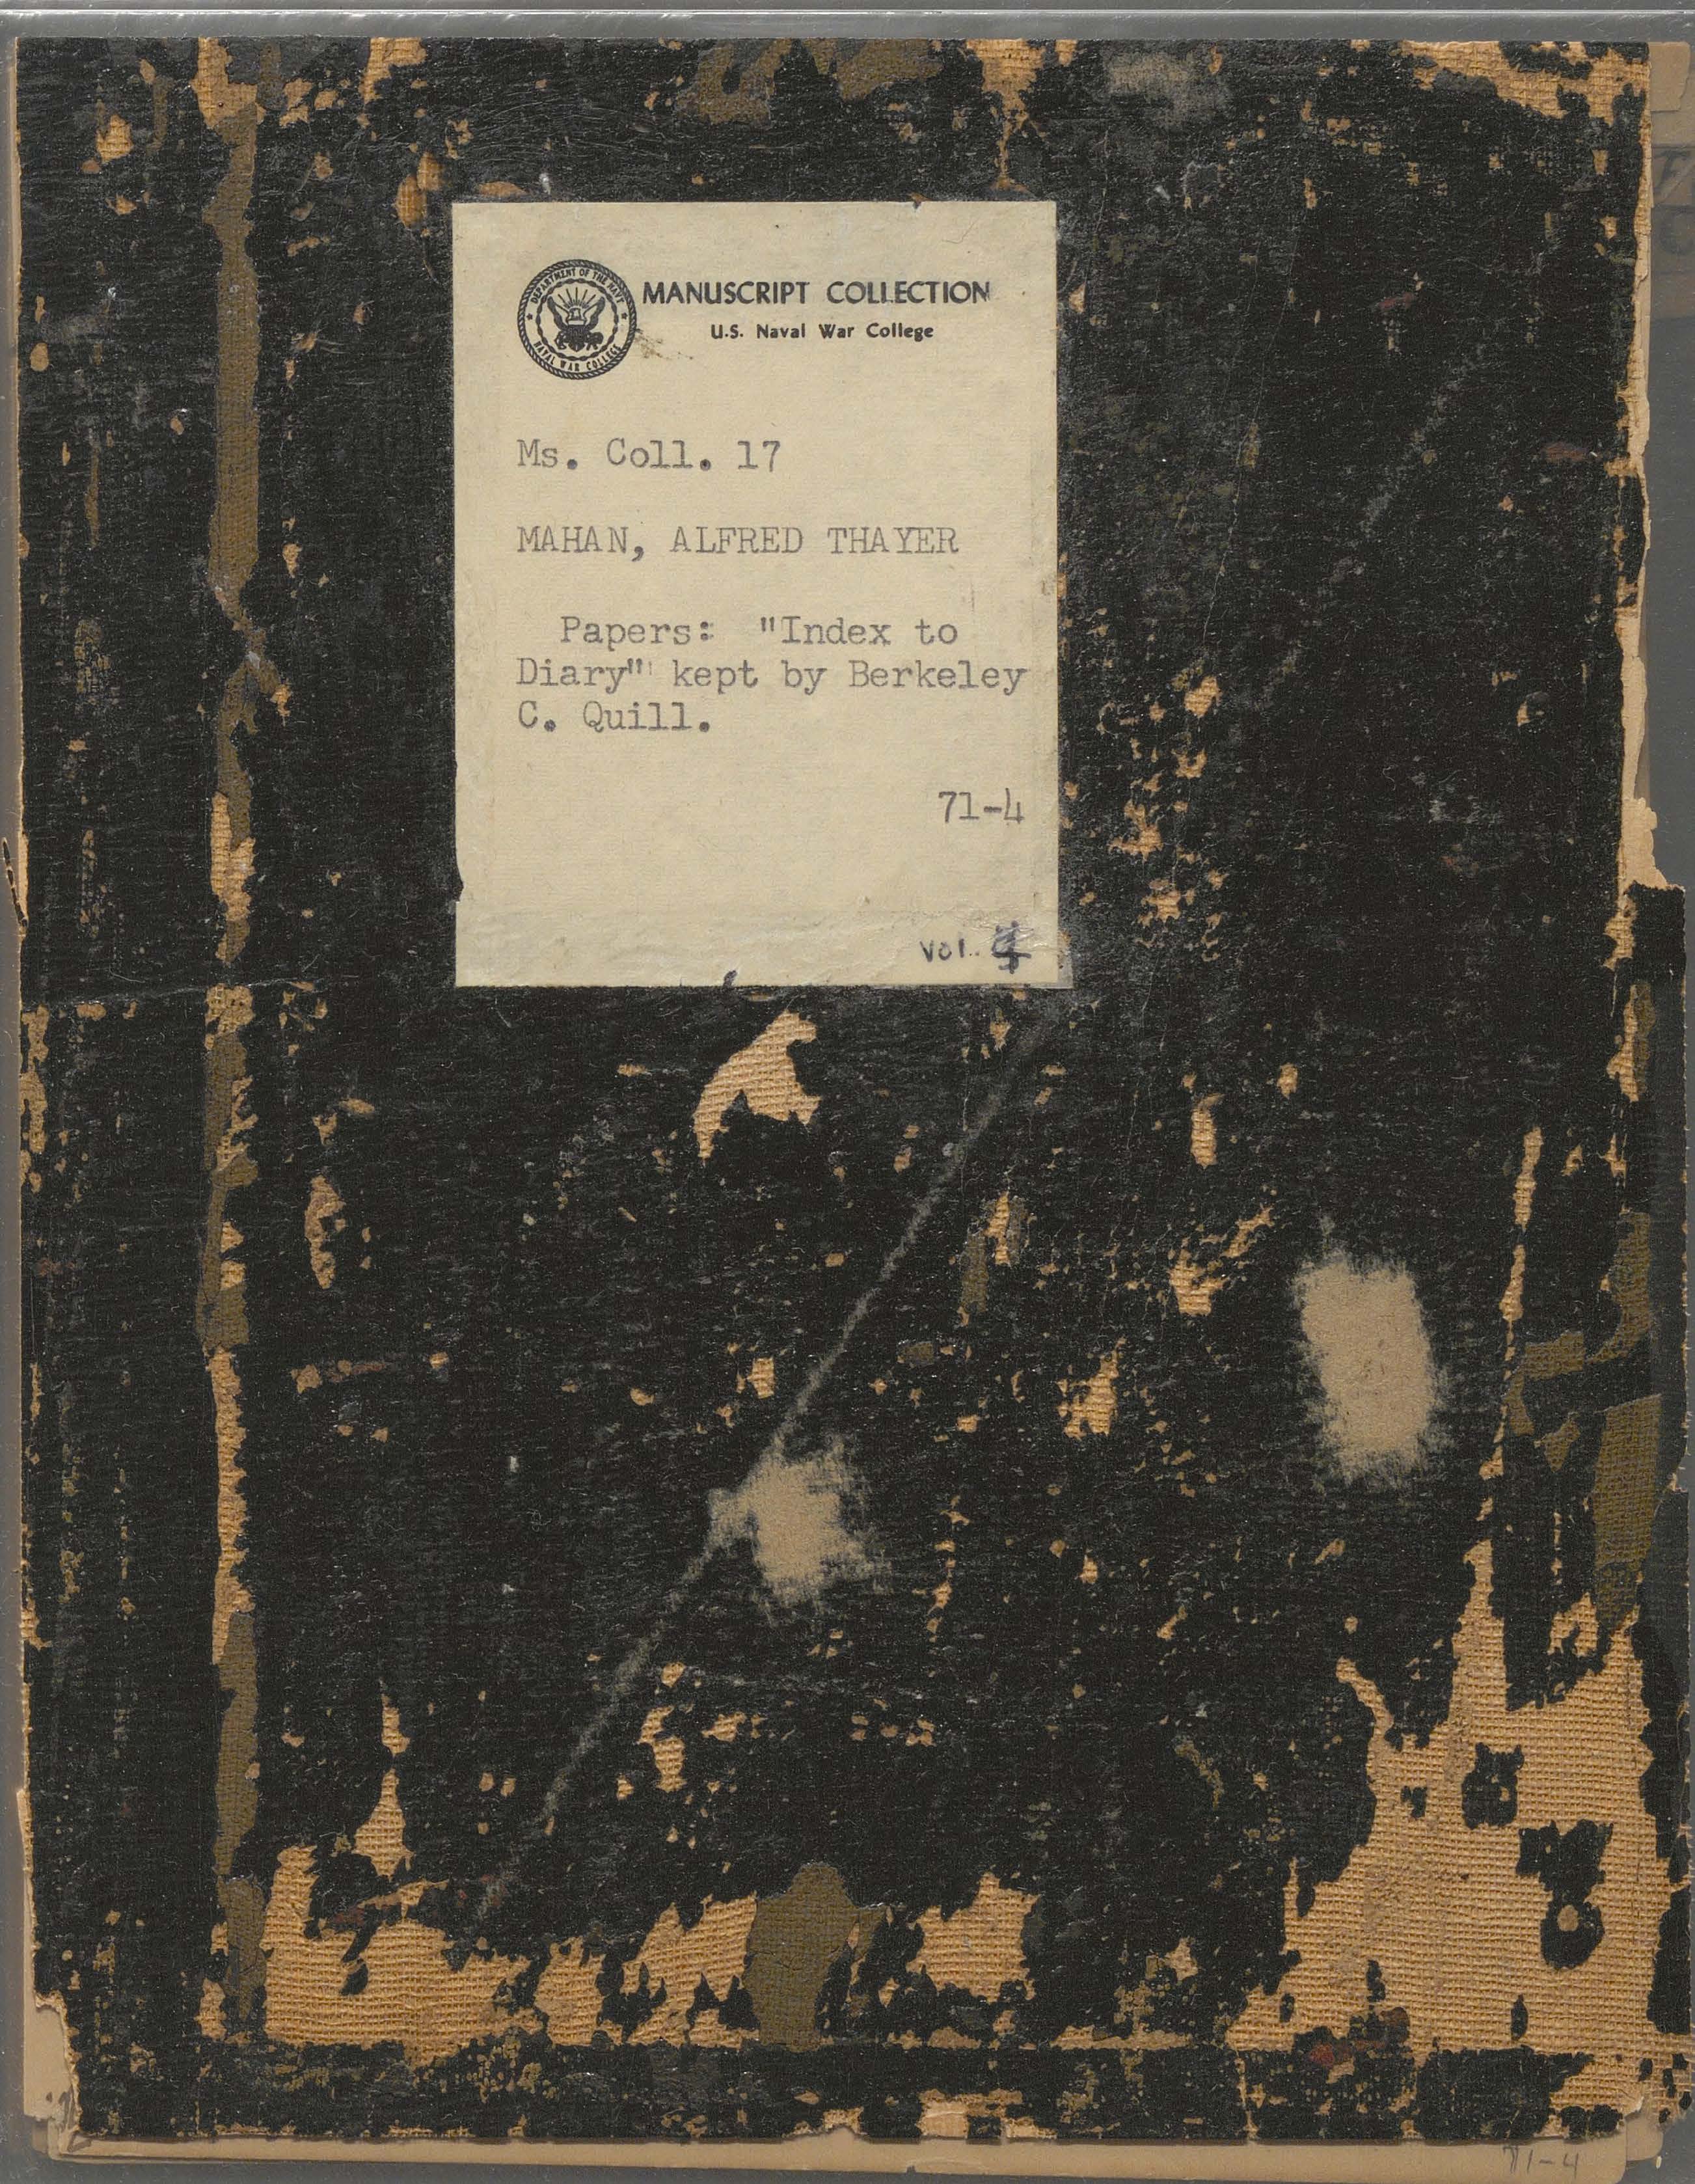 Mahan&#39;s research notes: Volume II of Index to scrapbook kept by Berkeley C. Quill